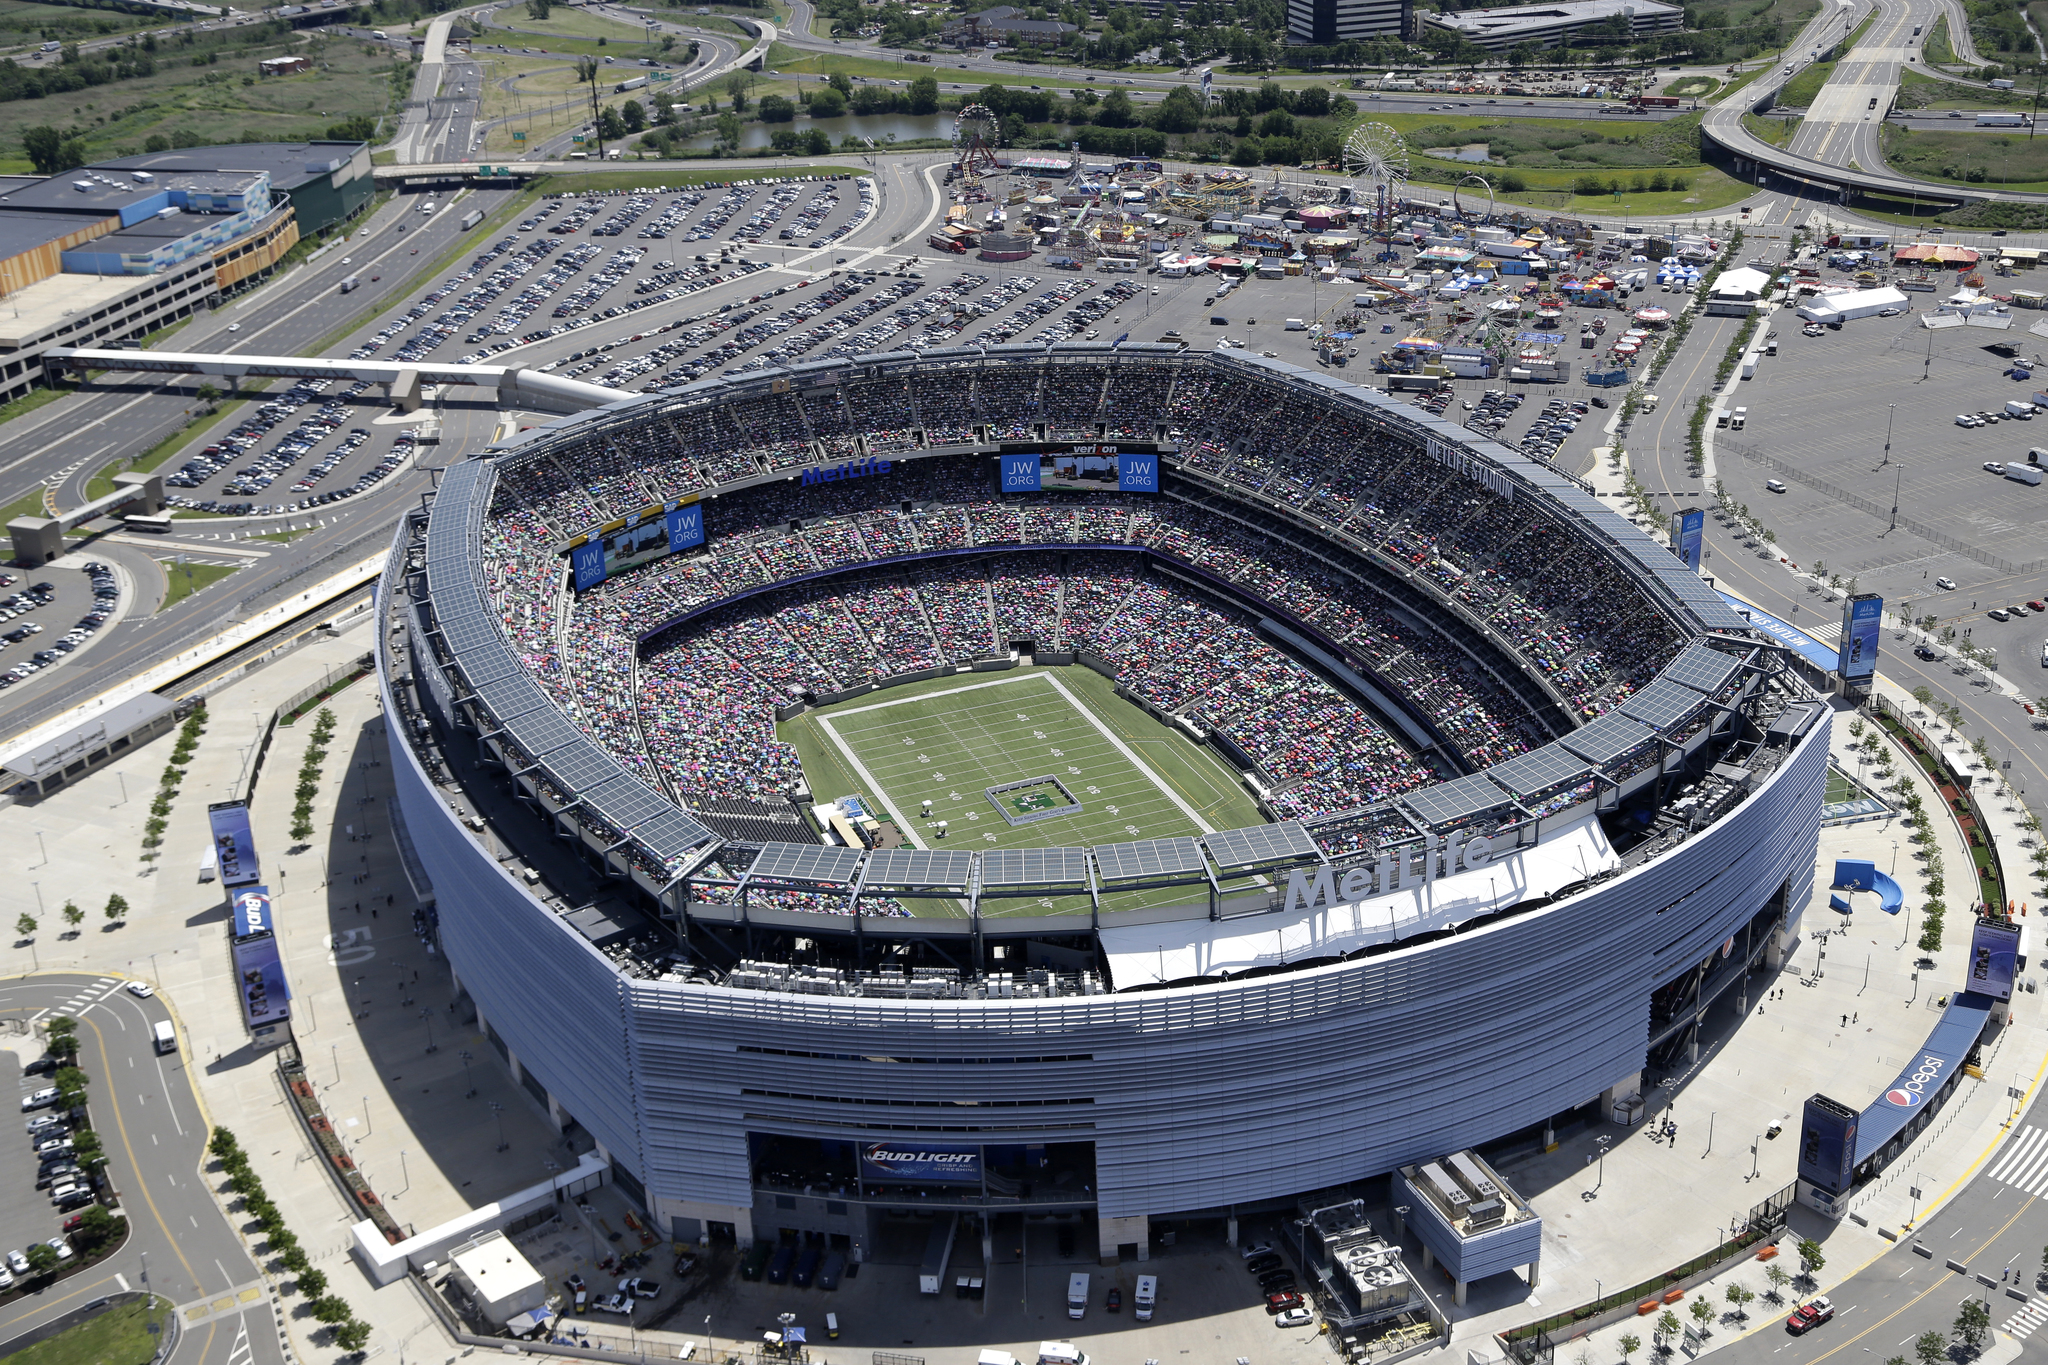 This is an aerial view showing MetLife Stadium in East Rutherford, N.J.